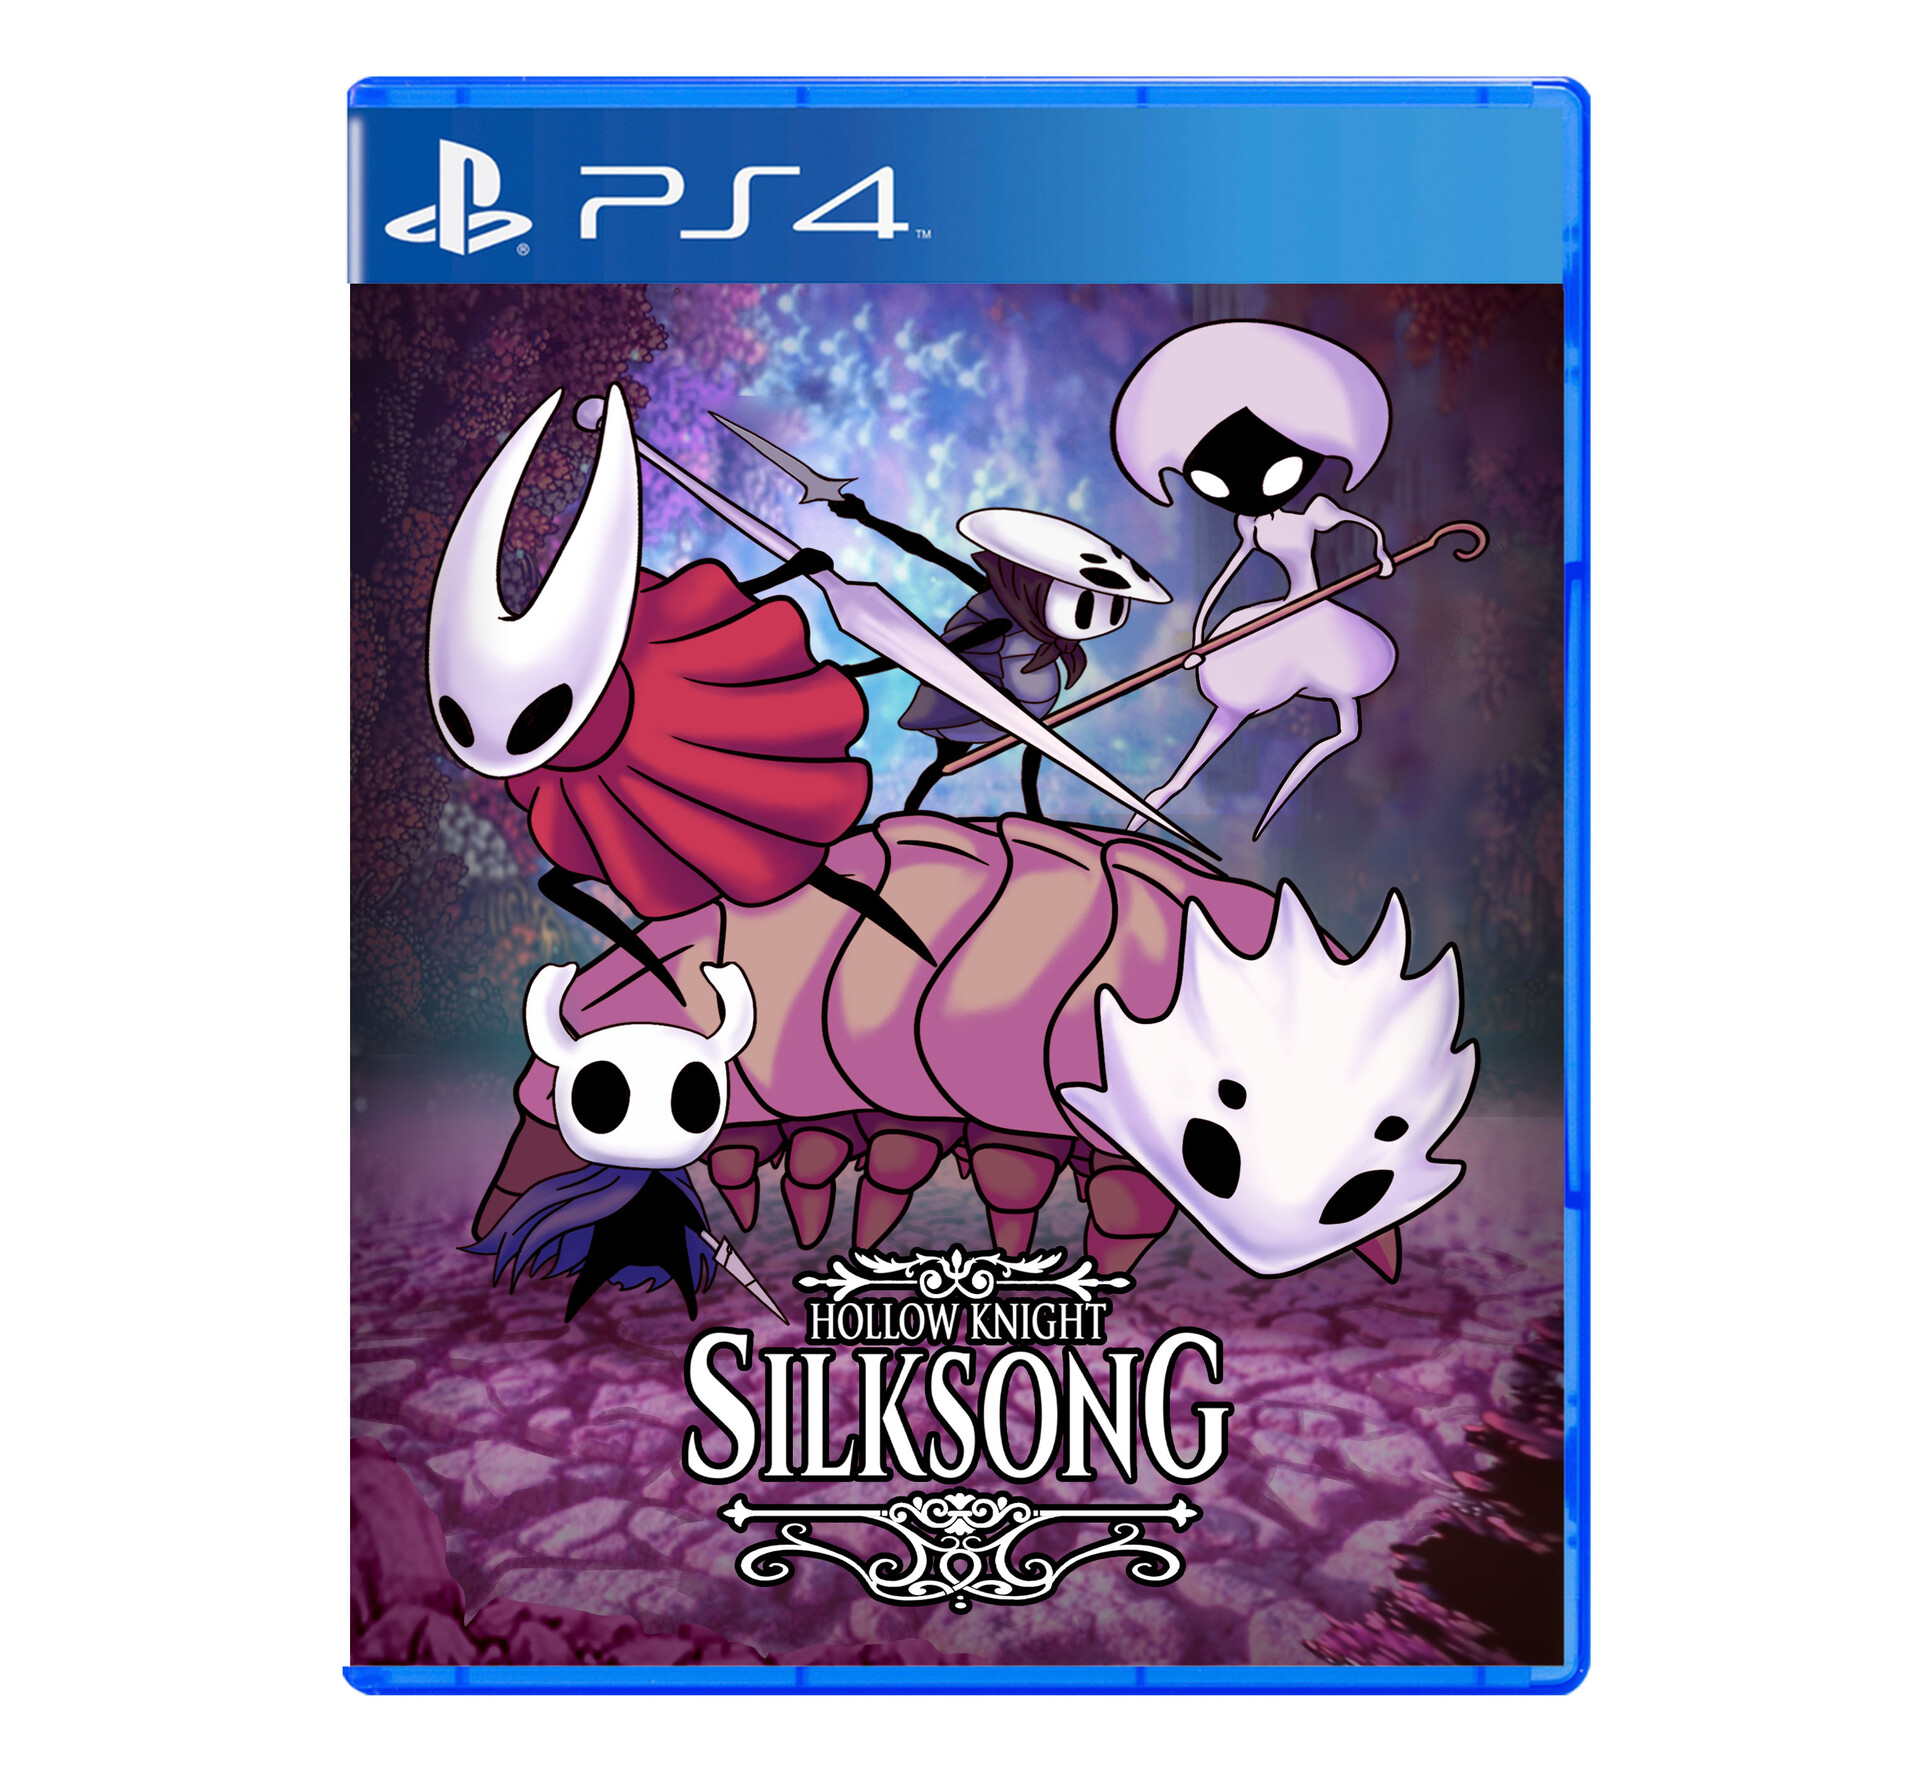 ArtStation - Hollow Knight Silksong Game Cover (not the official Art)